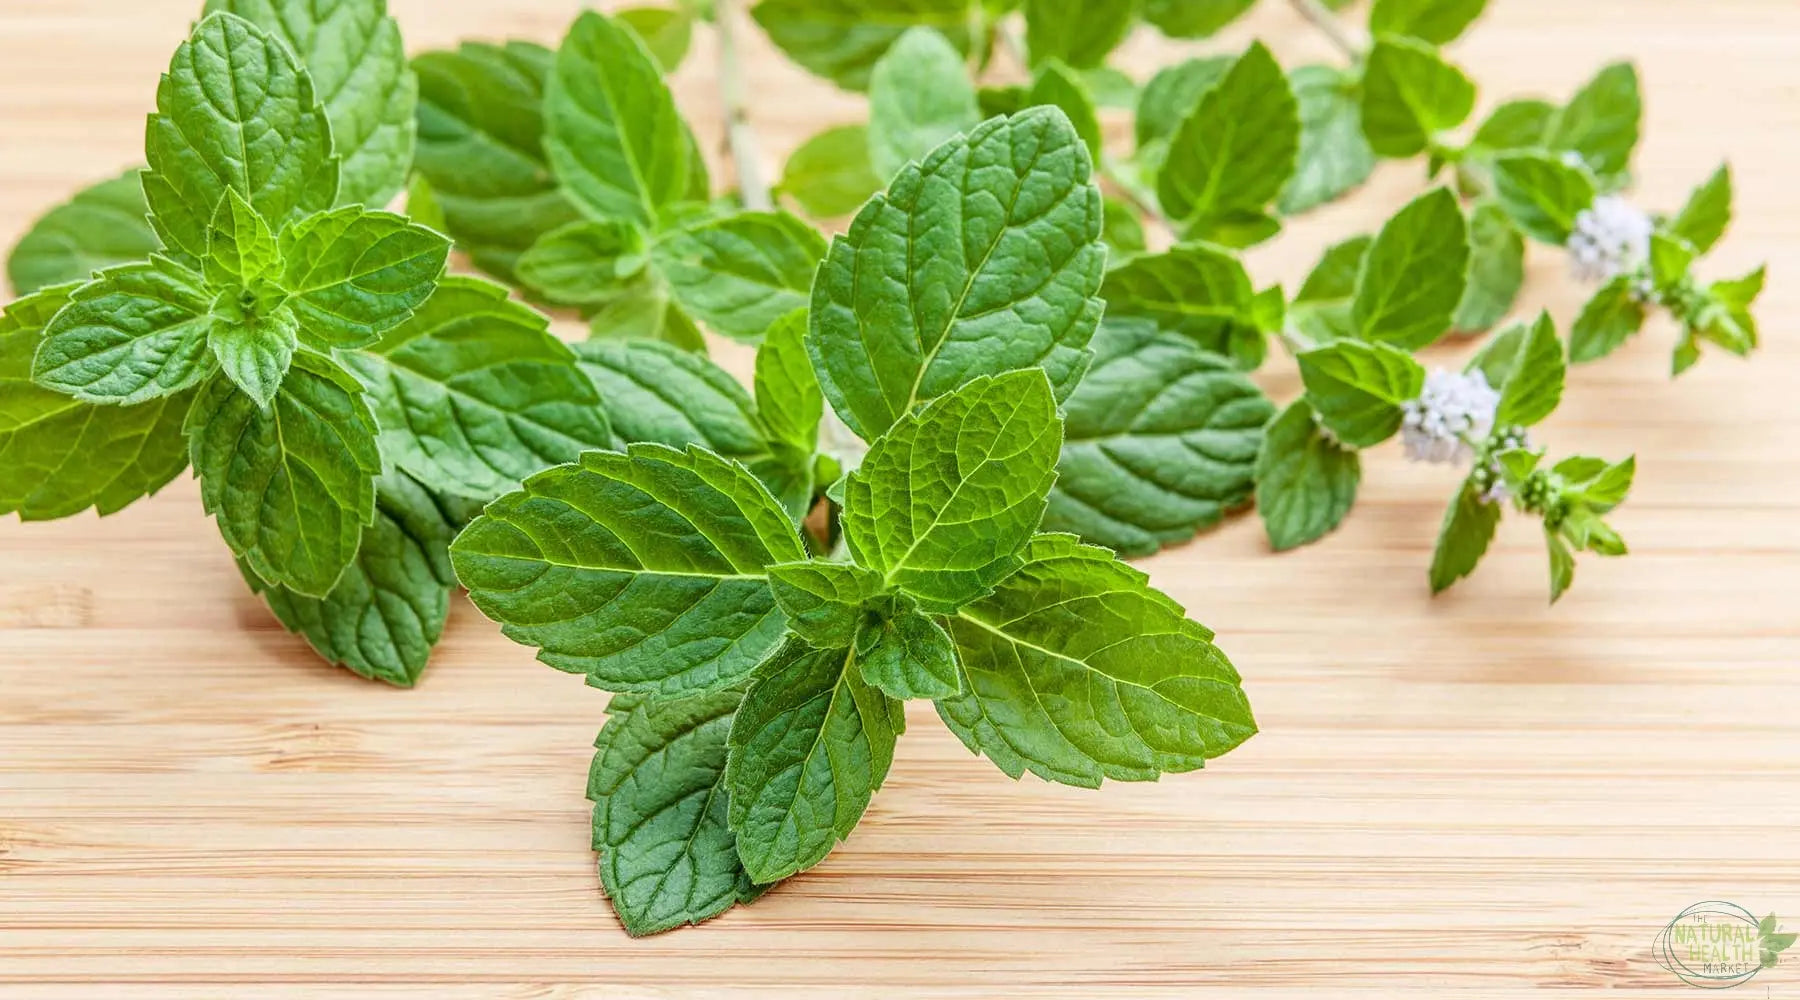 Peppermint Tea Stress Relief - The Natural Health Market